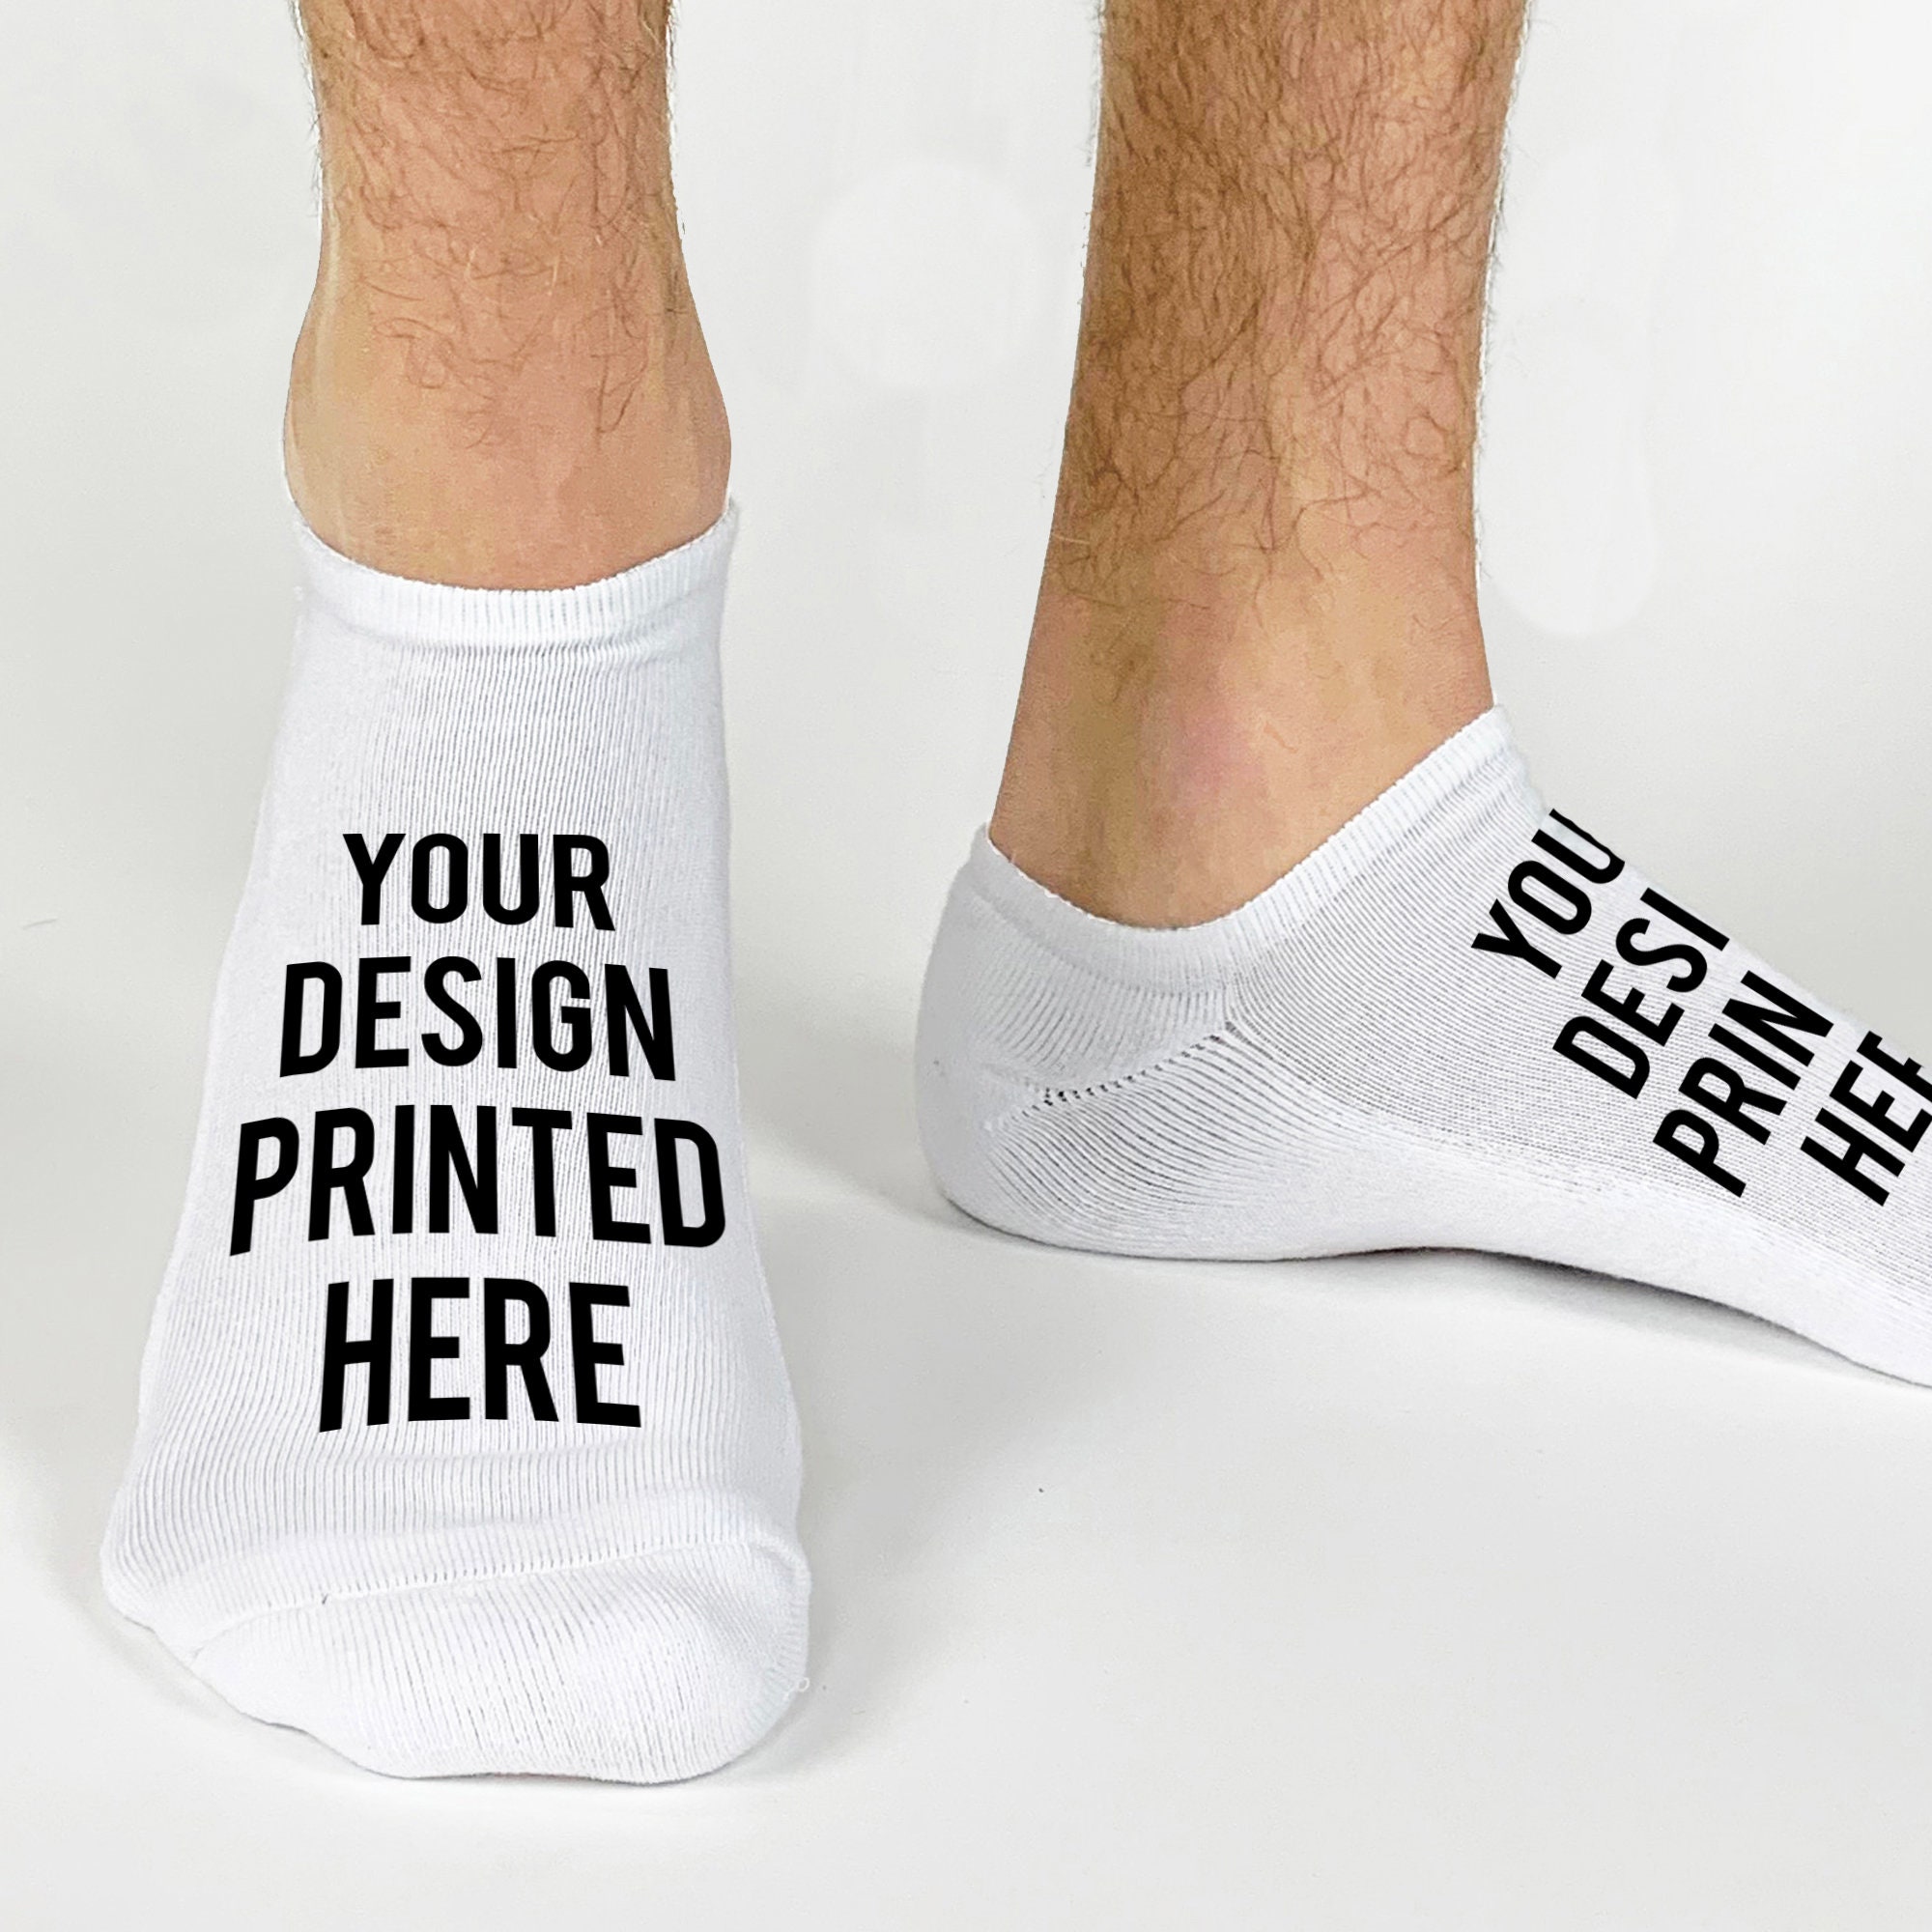 Custom and Personalized No Show Socks for Men, Cool Socks to Add